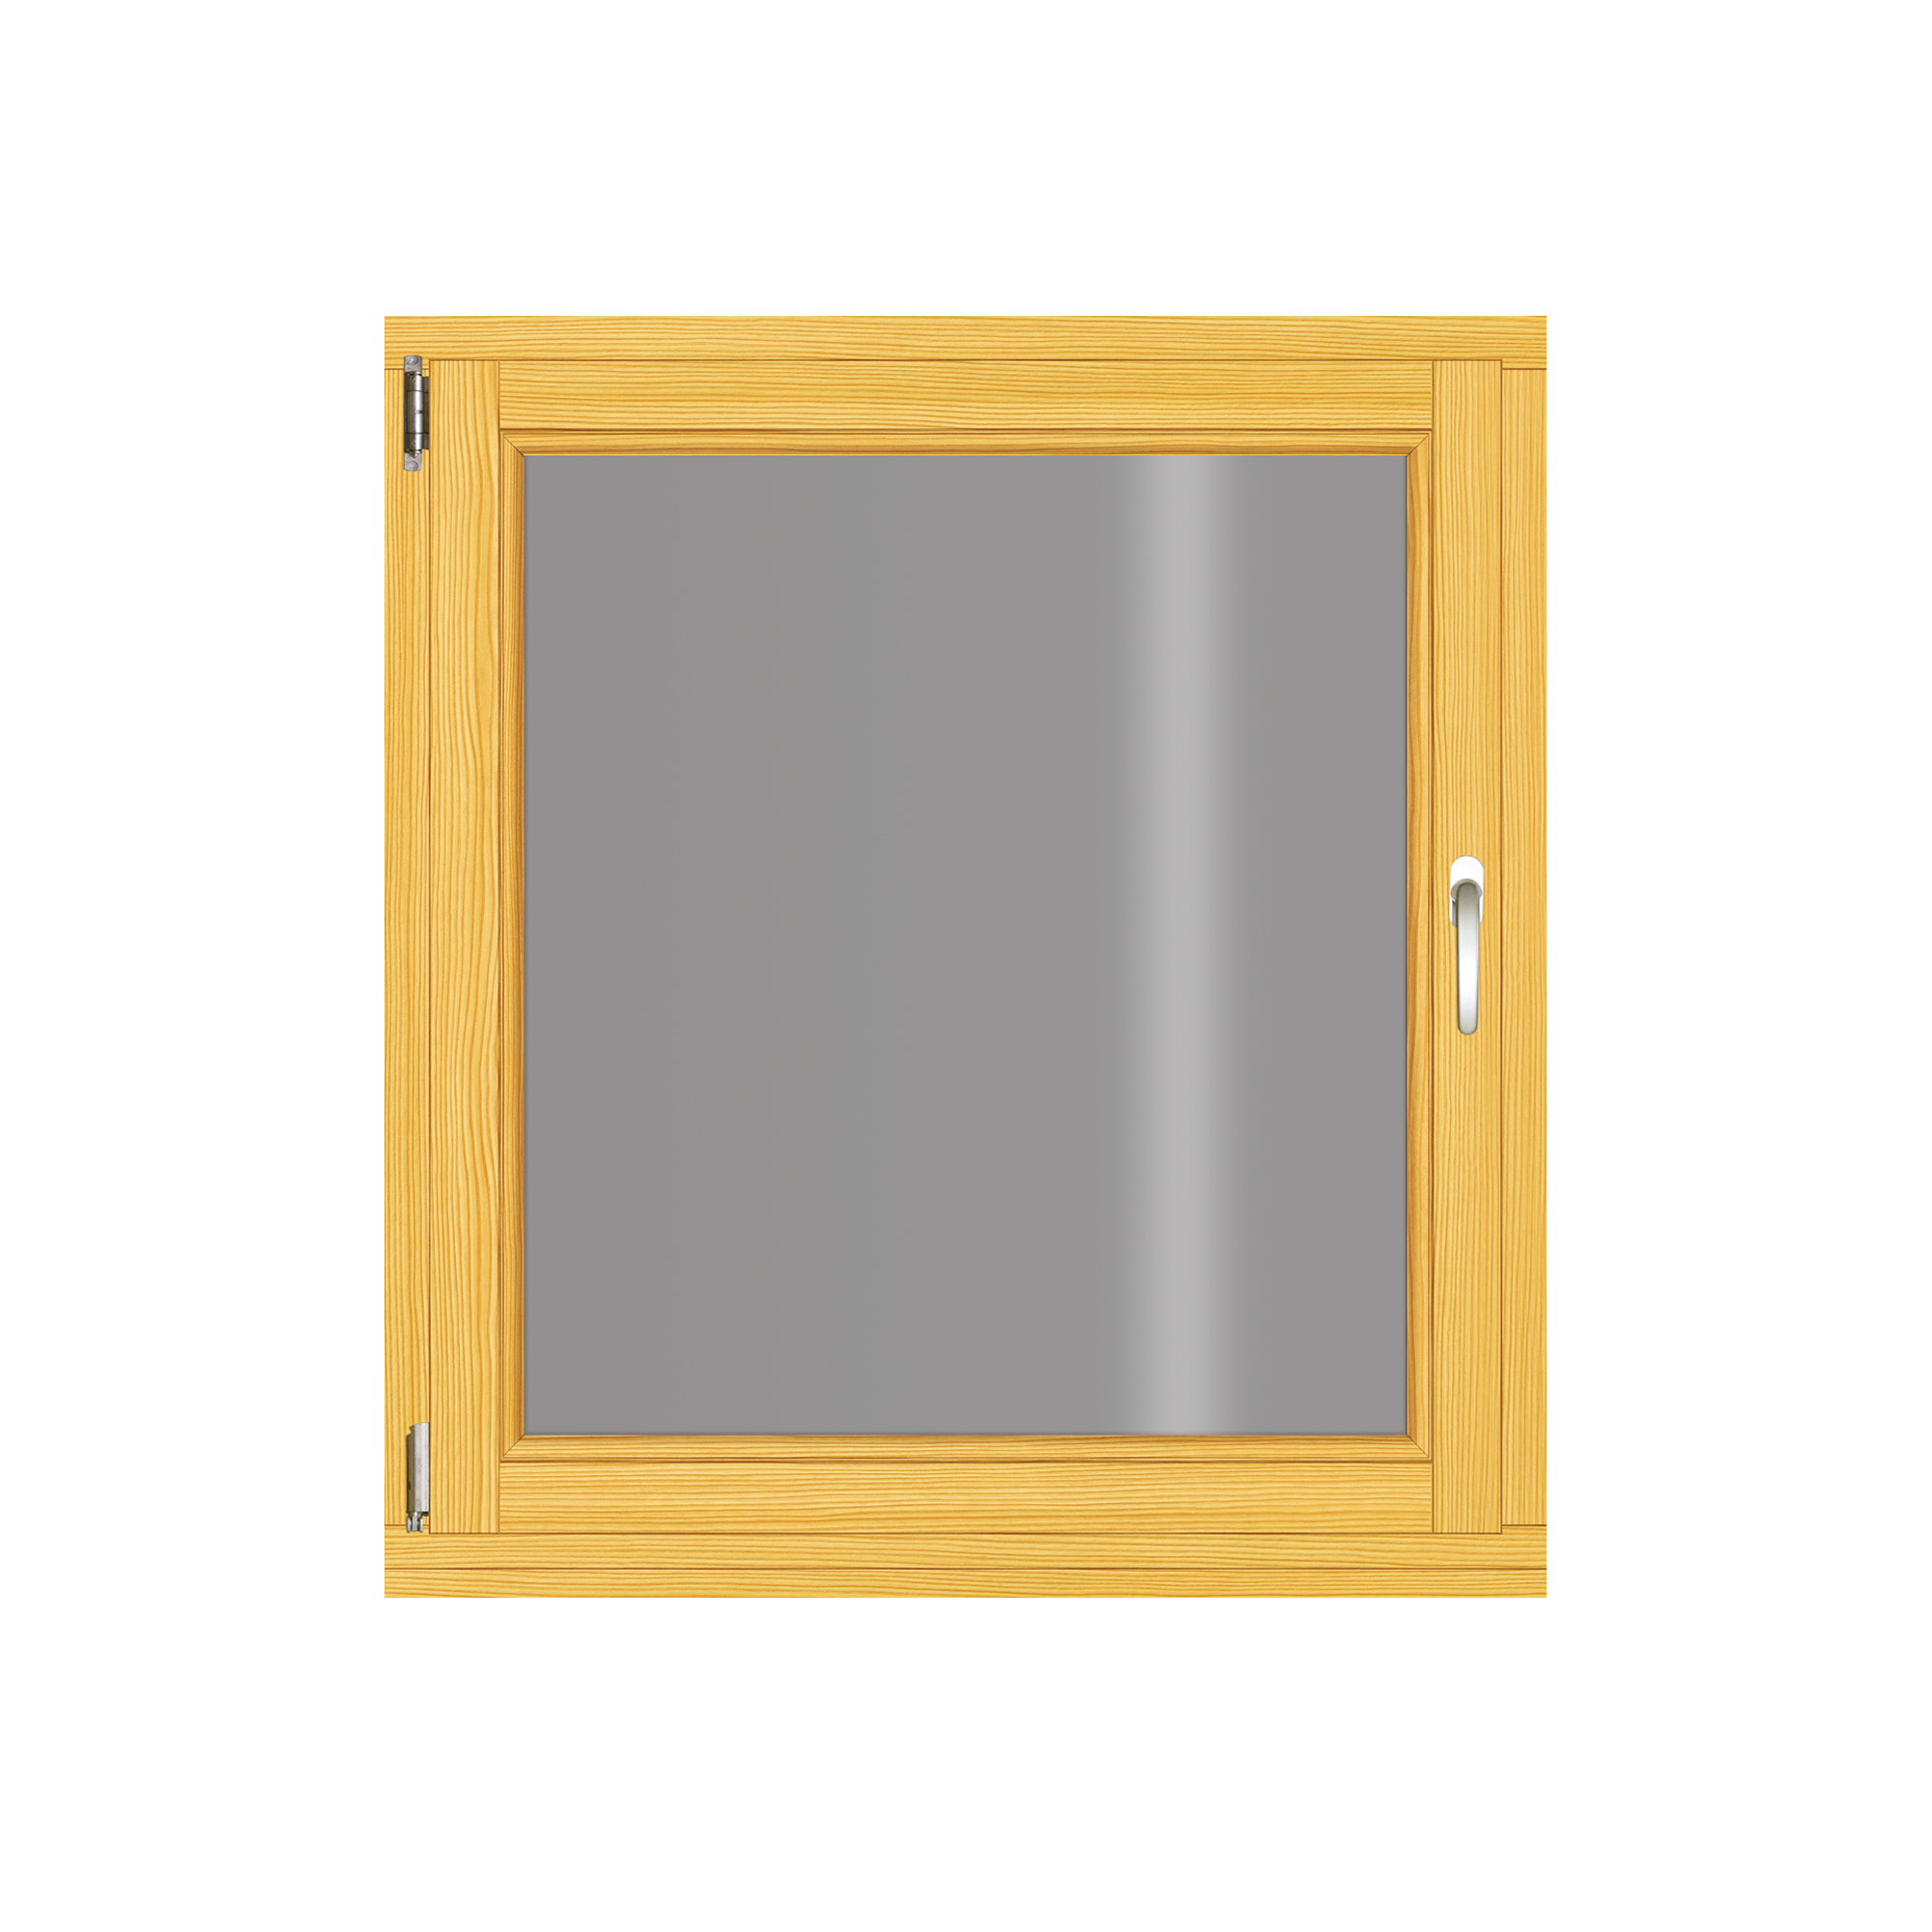 Holzfenster 780 x 980 mm Fichte DIN links + product picture